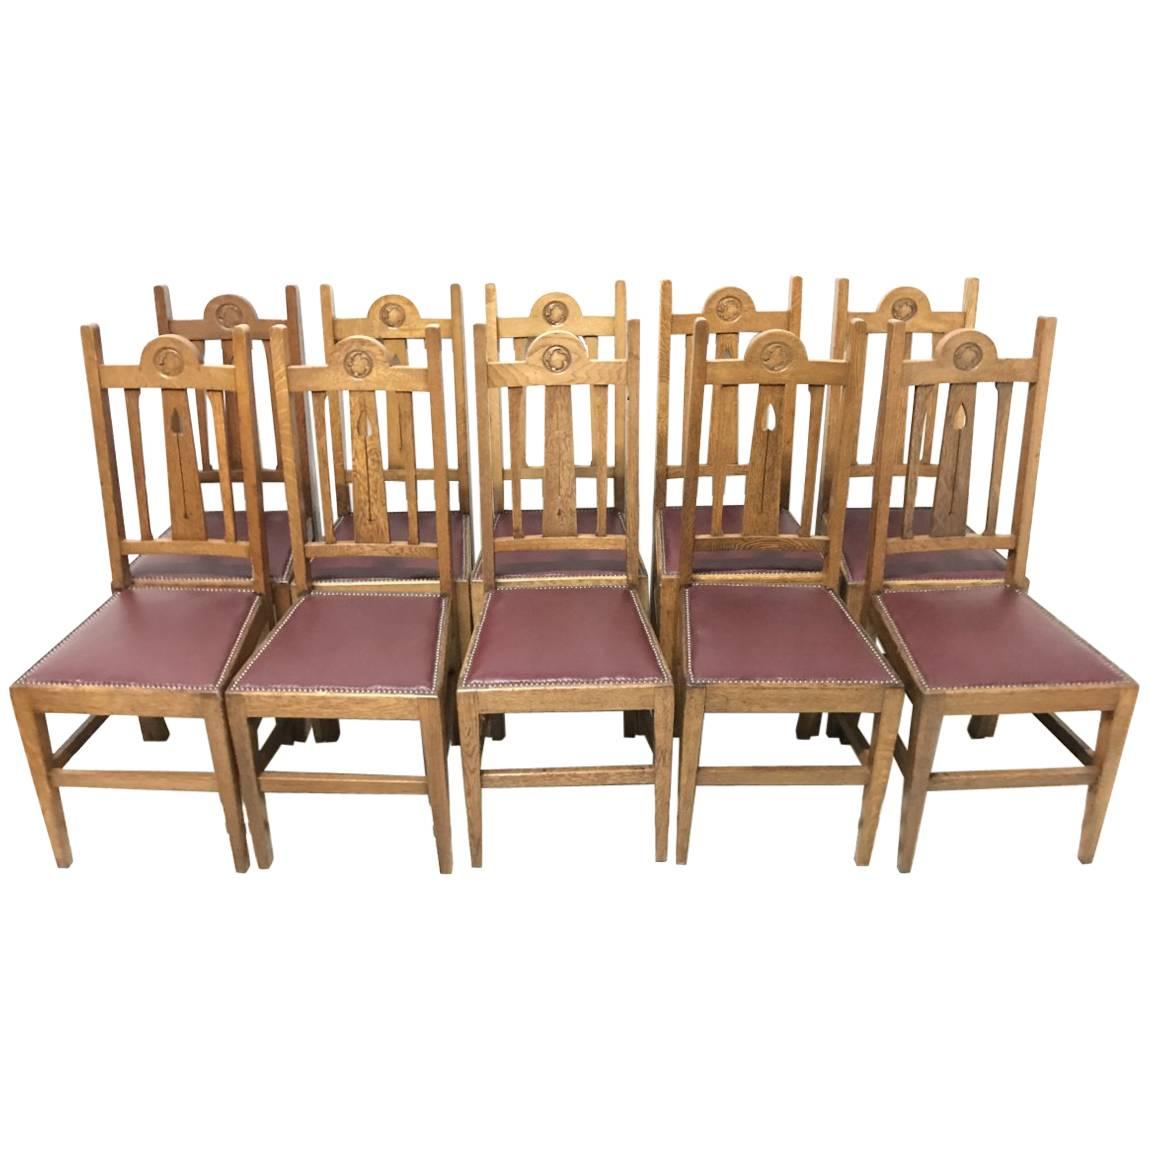 Liberty & Co, Ten Arts & Crafts Oak Dining Chairs with Stylised Floral Details